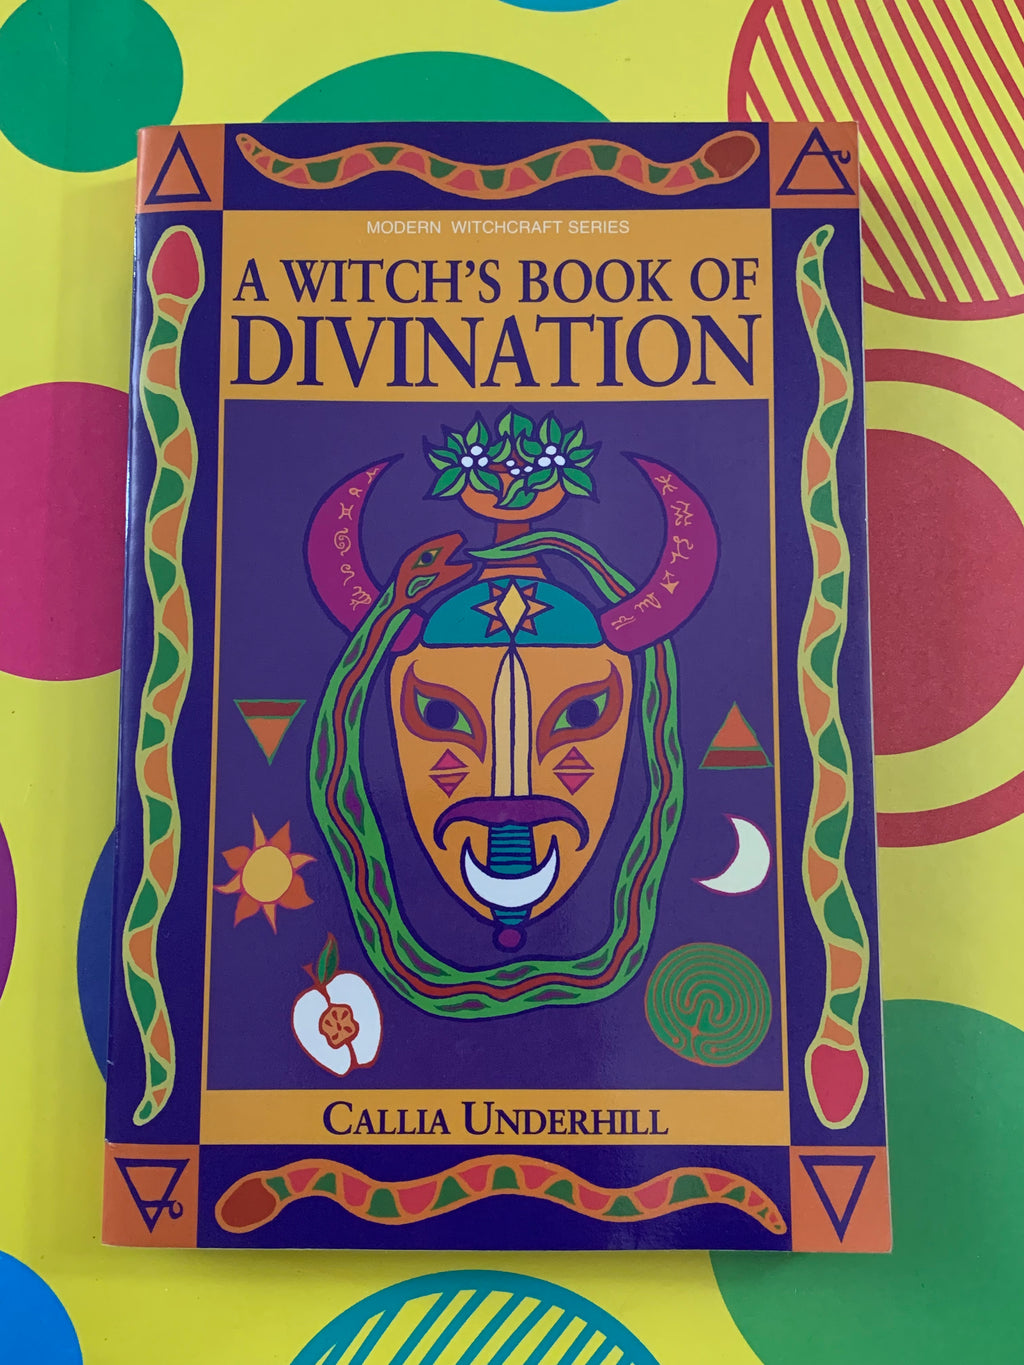 A Witch's Book of Divination- By Callia Underhill